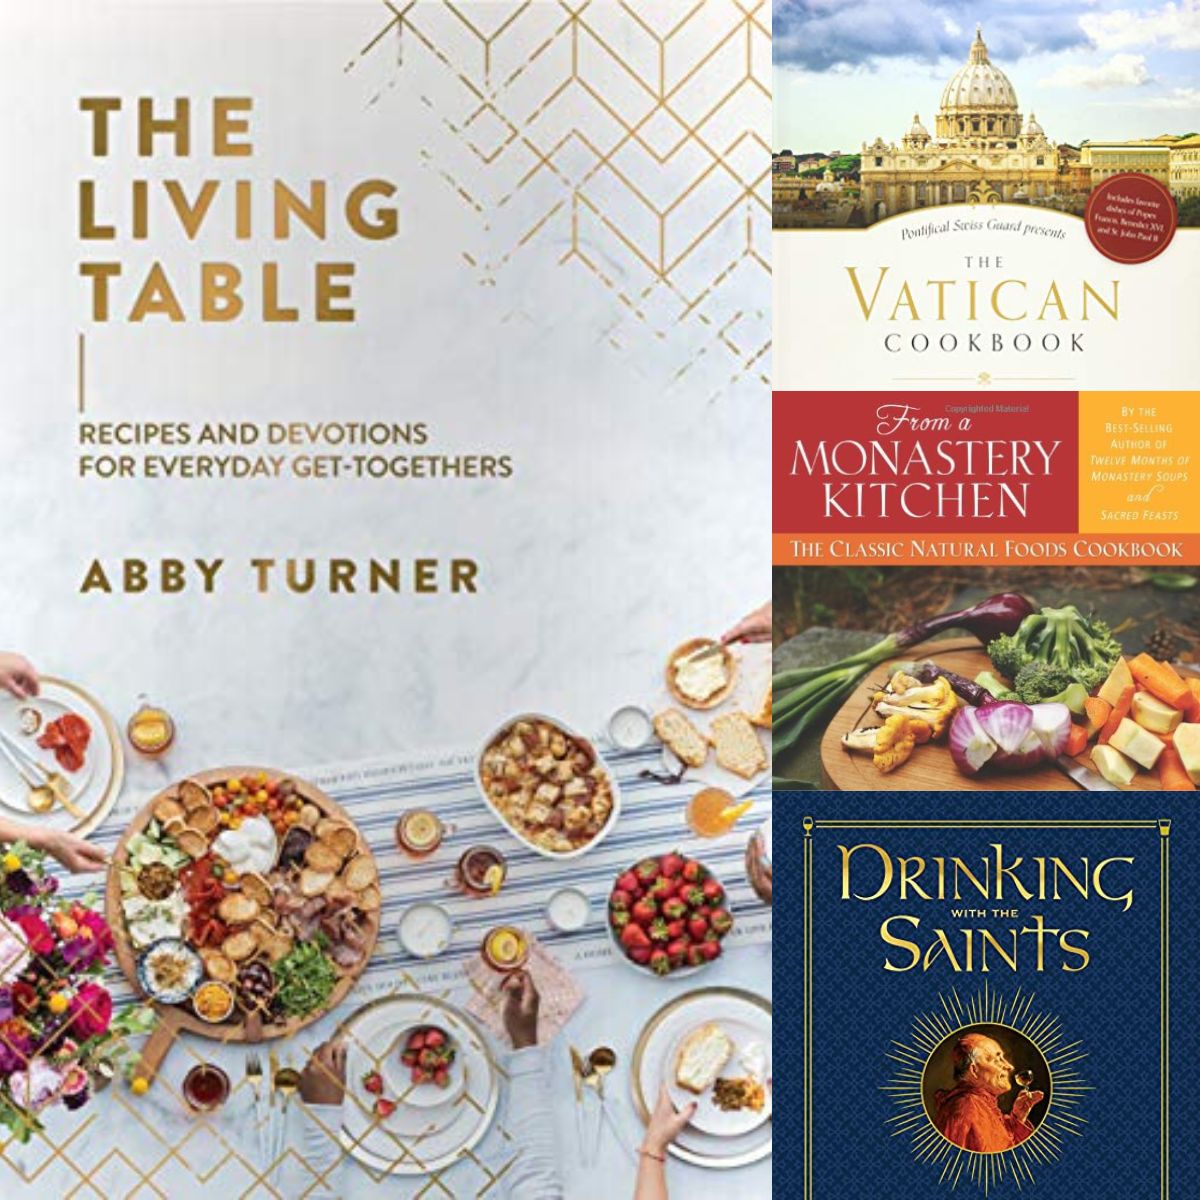 A photo collage shows the covers of 4 popular Catholic cookbooks. 